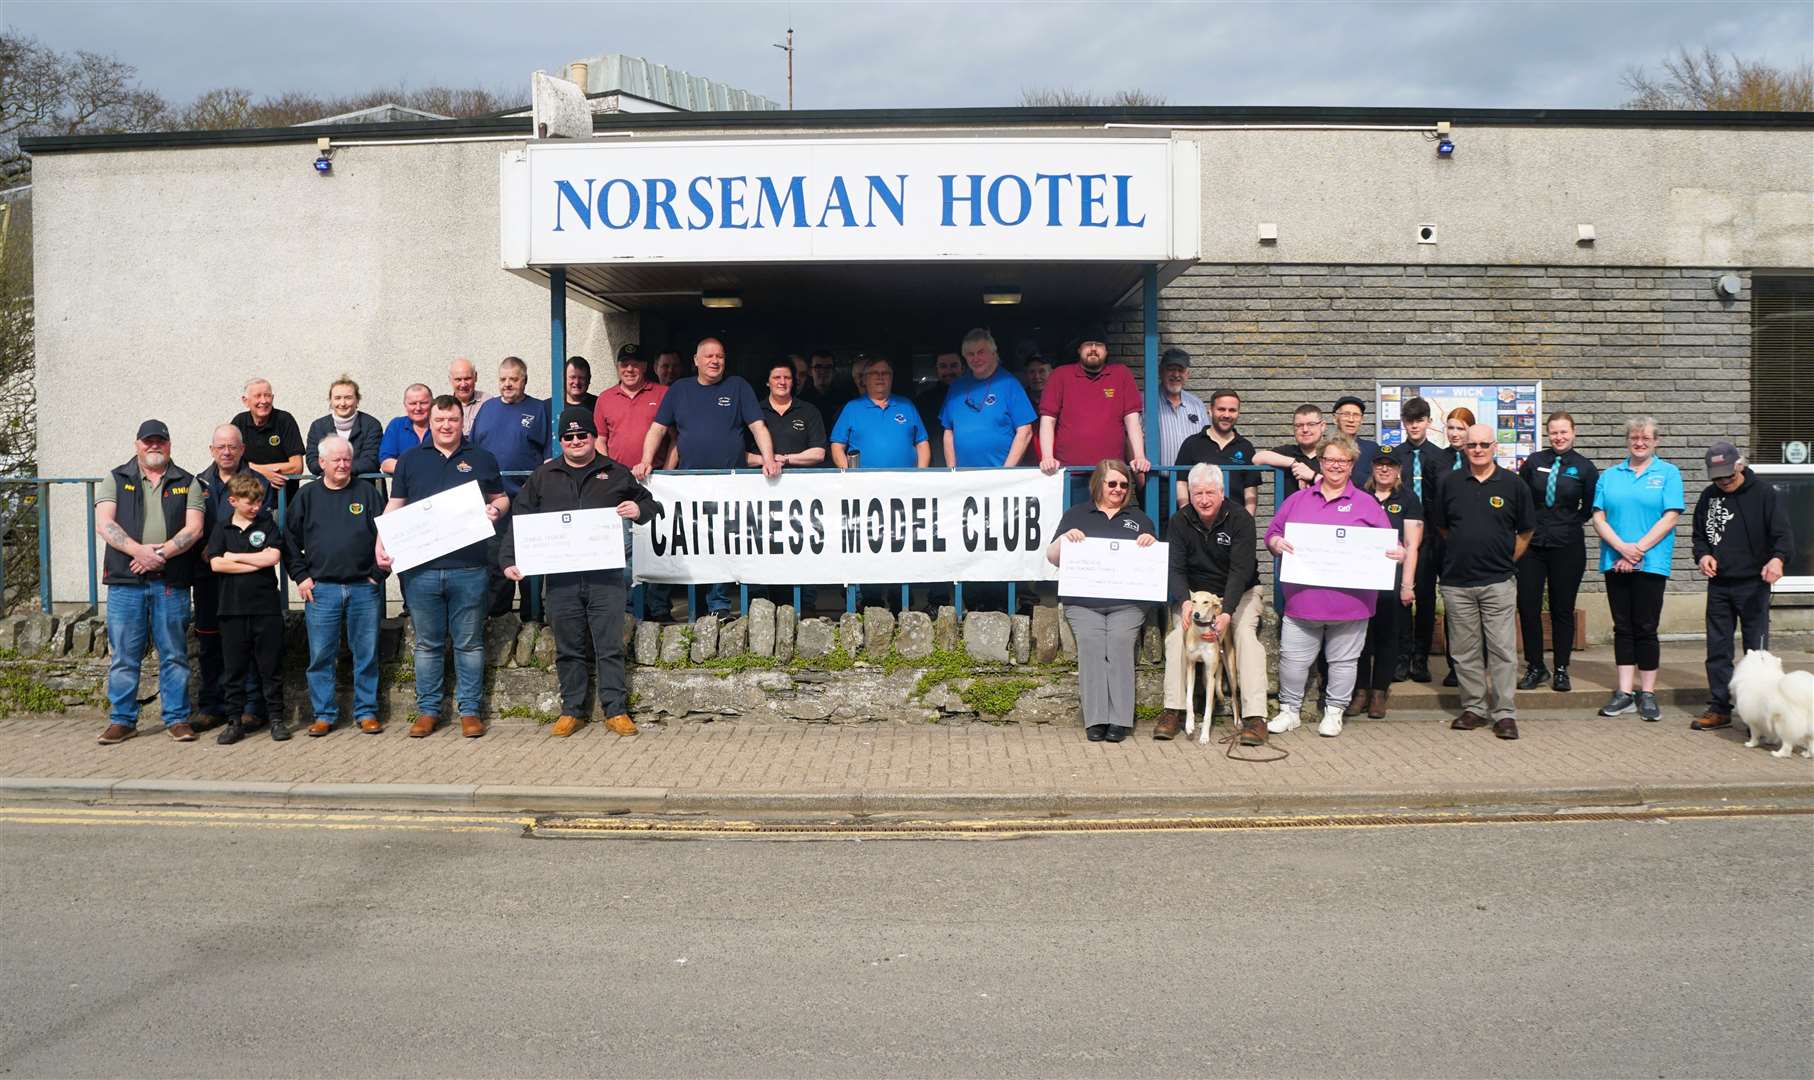 Four cheques totalling £2000 went to different charities thanks to the Caithness Model Club. Cats Protection, KWK9 Rescue, Thurso Lifeboat and Wick Lifeboat received £500 each at the handover outside the Norseman Hotel in Wick. Picture: DGS